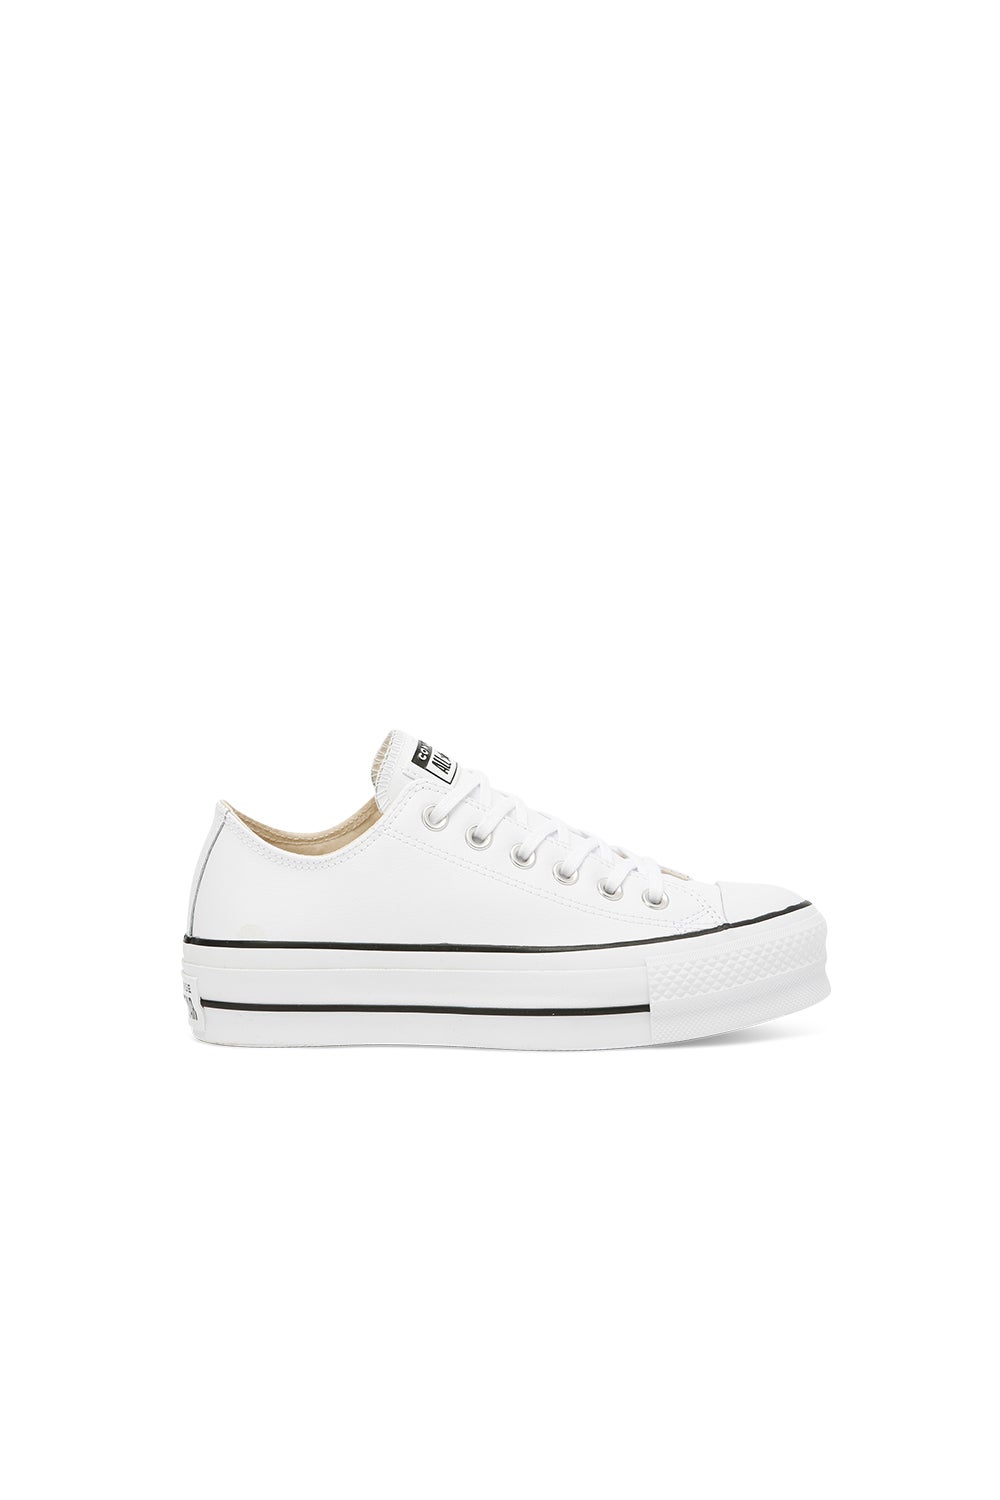 converse chuck taylor all star low top white